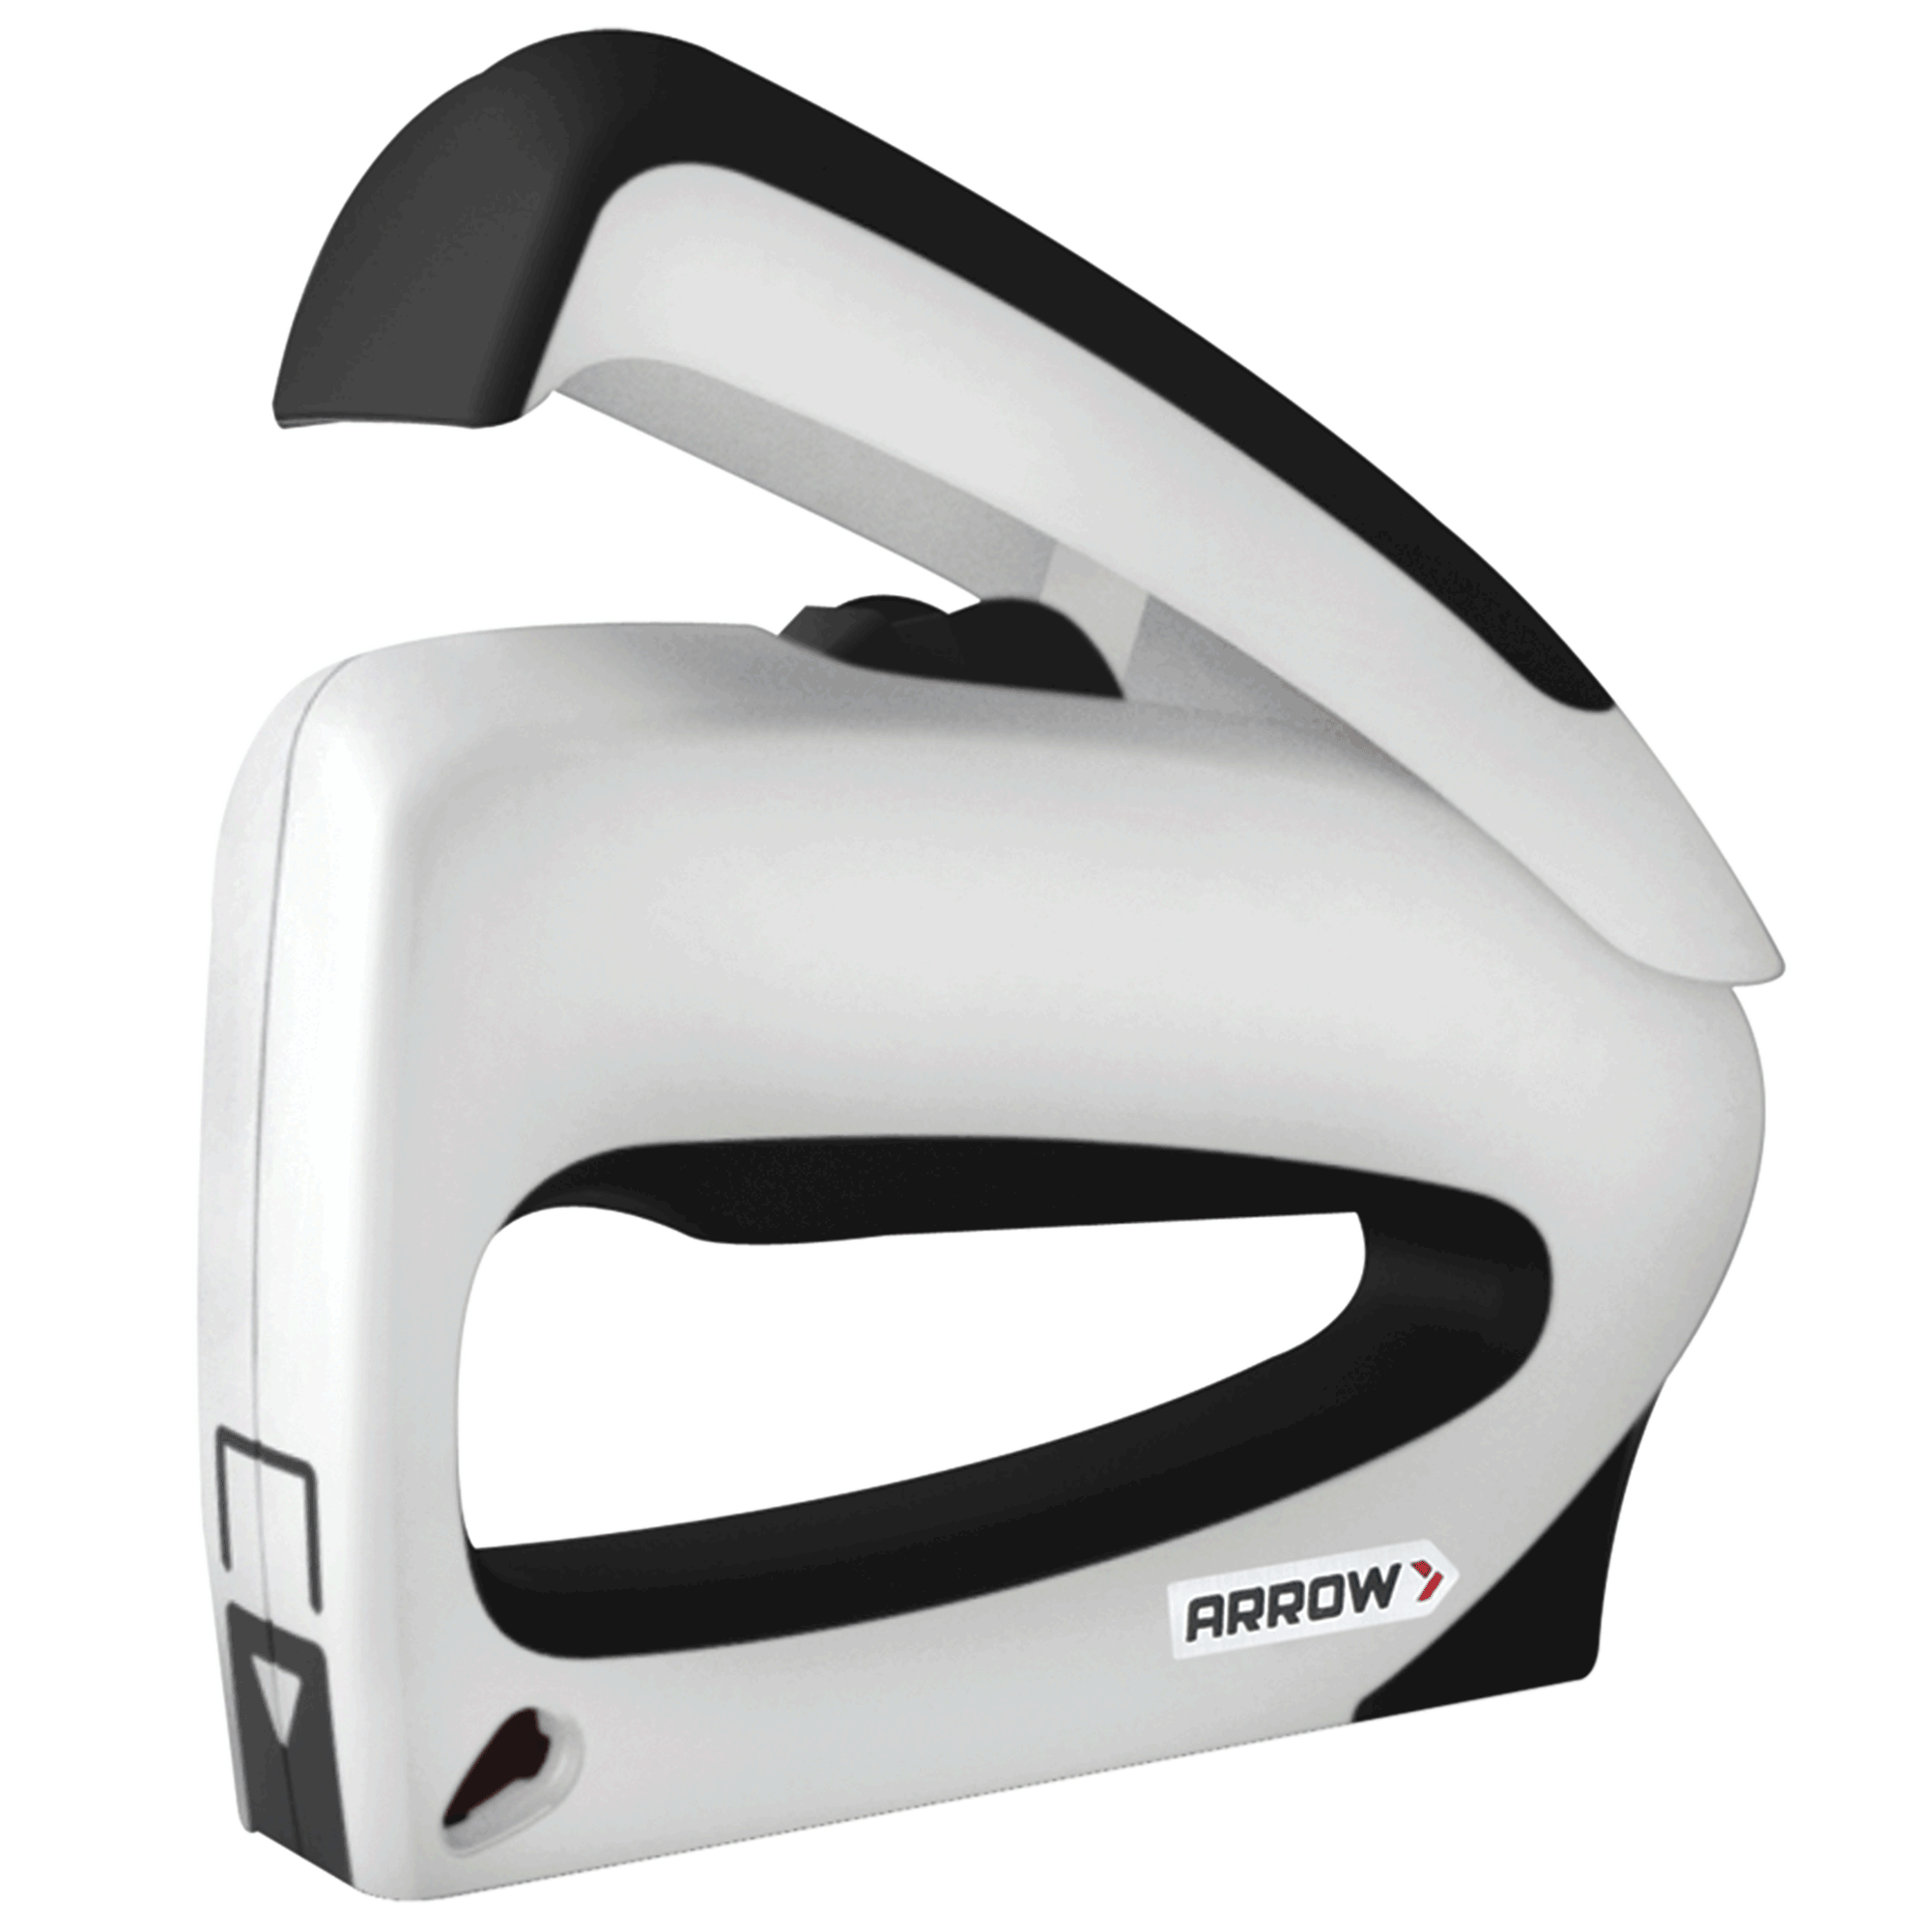 Thoughts on the Arrow PowerShot Stapler 